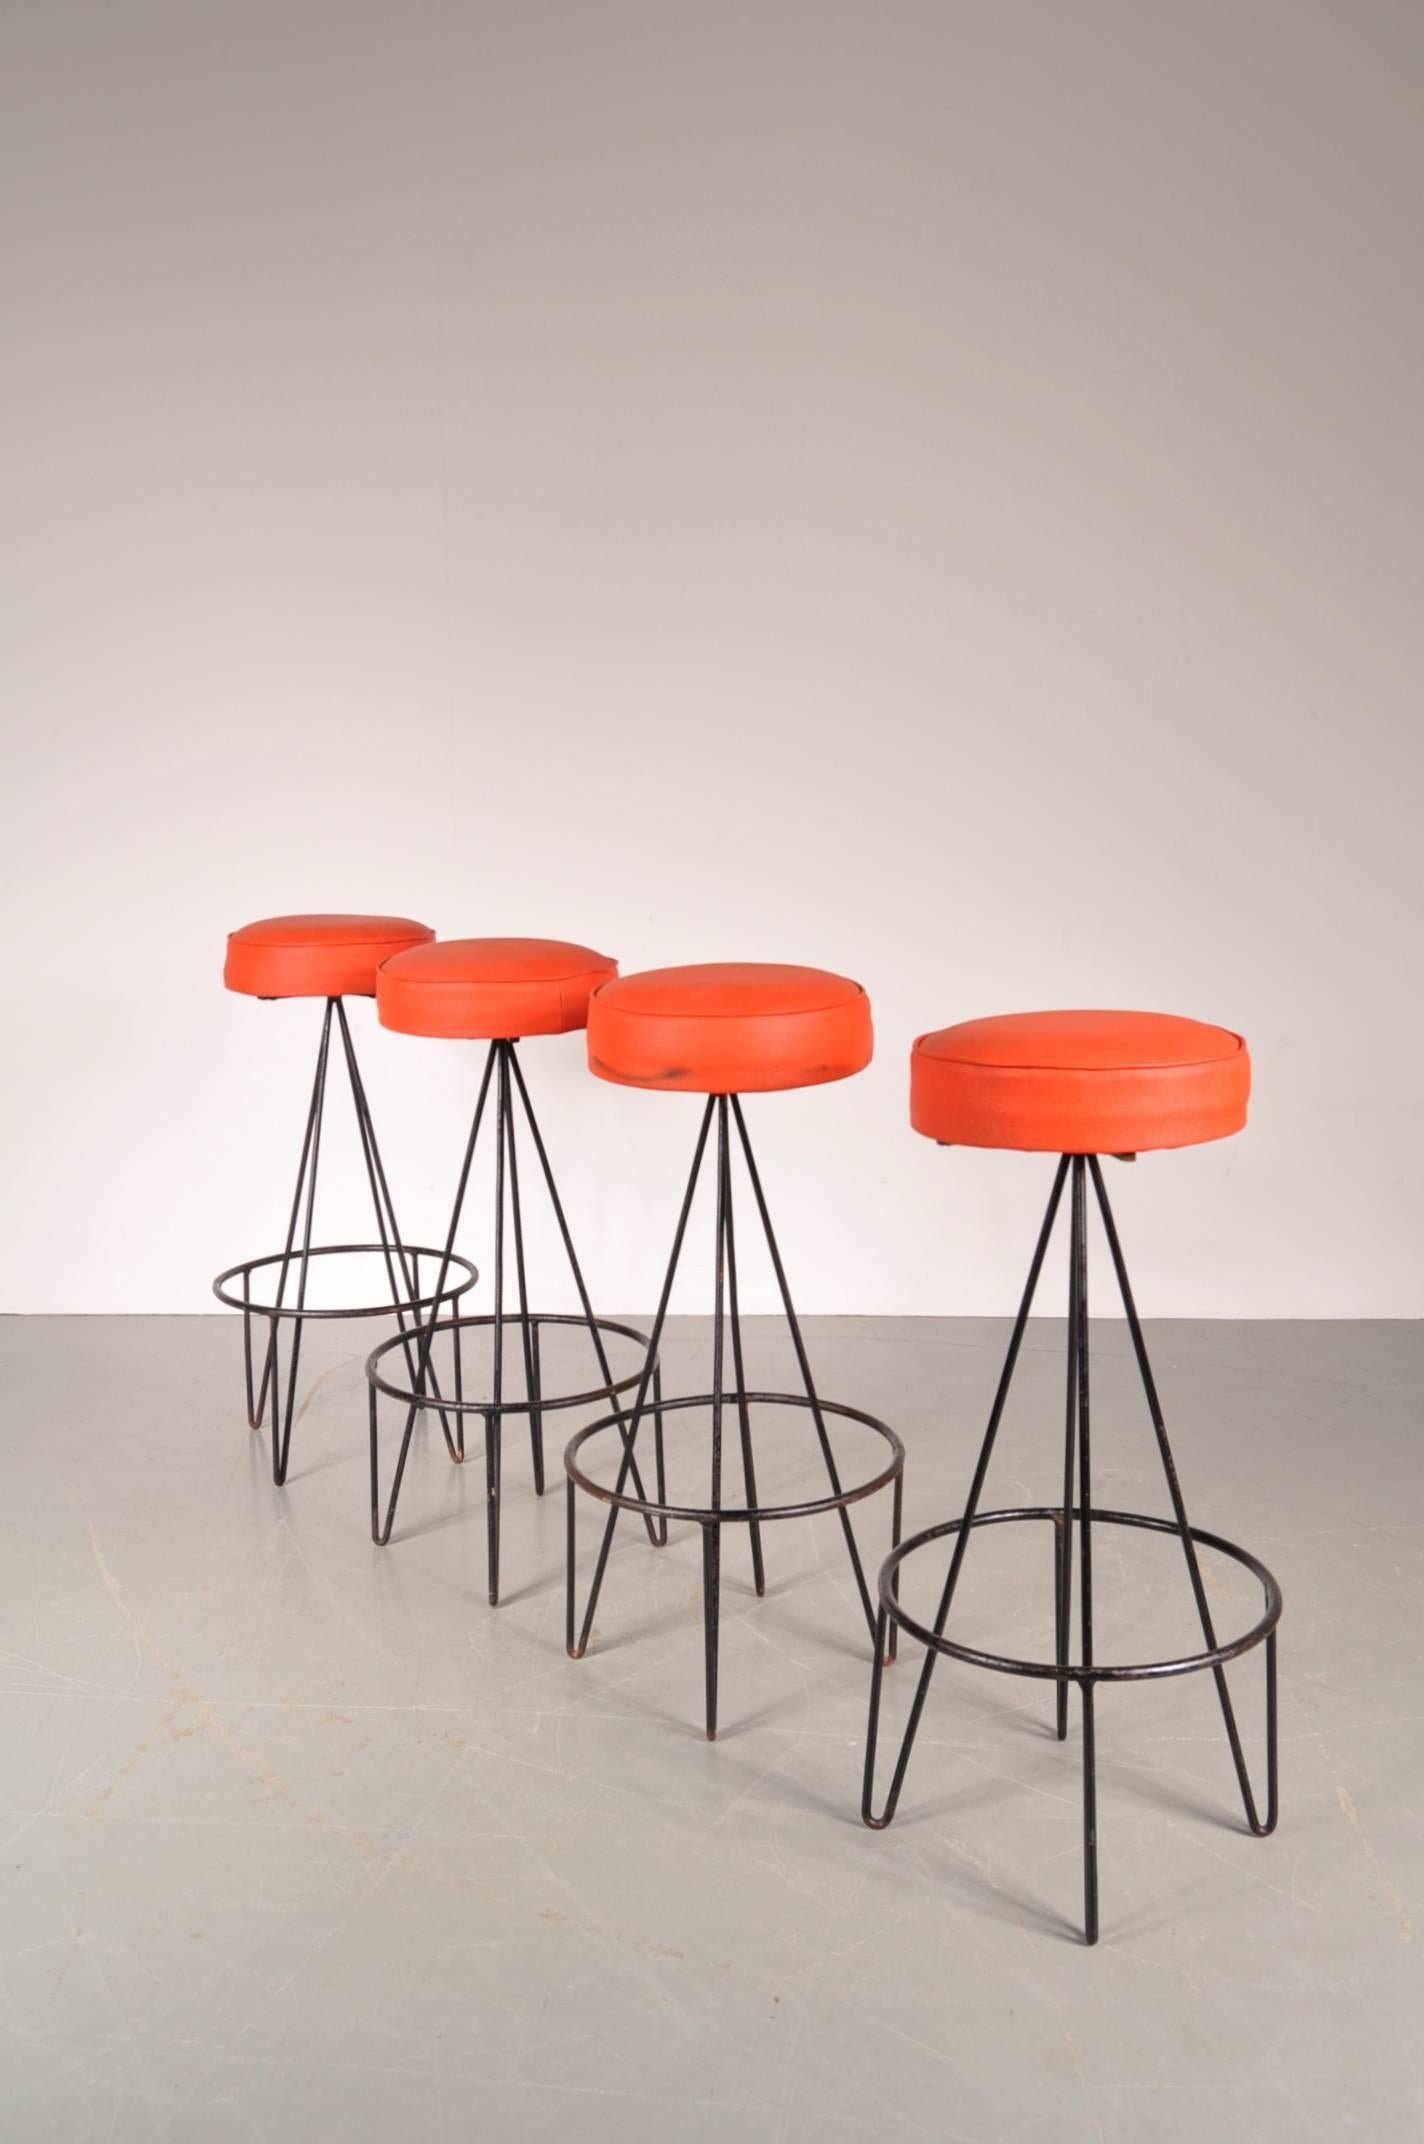 Stunning set of four bar stools designed by Frederick Weinberg in the USA, circa 1950.

The stools are made of high quality black lacquered metal with a red skai upholstered seat. The legs are bent and connected by a black metal ring, giving it a